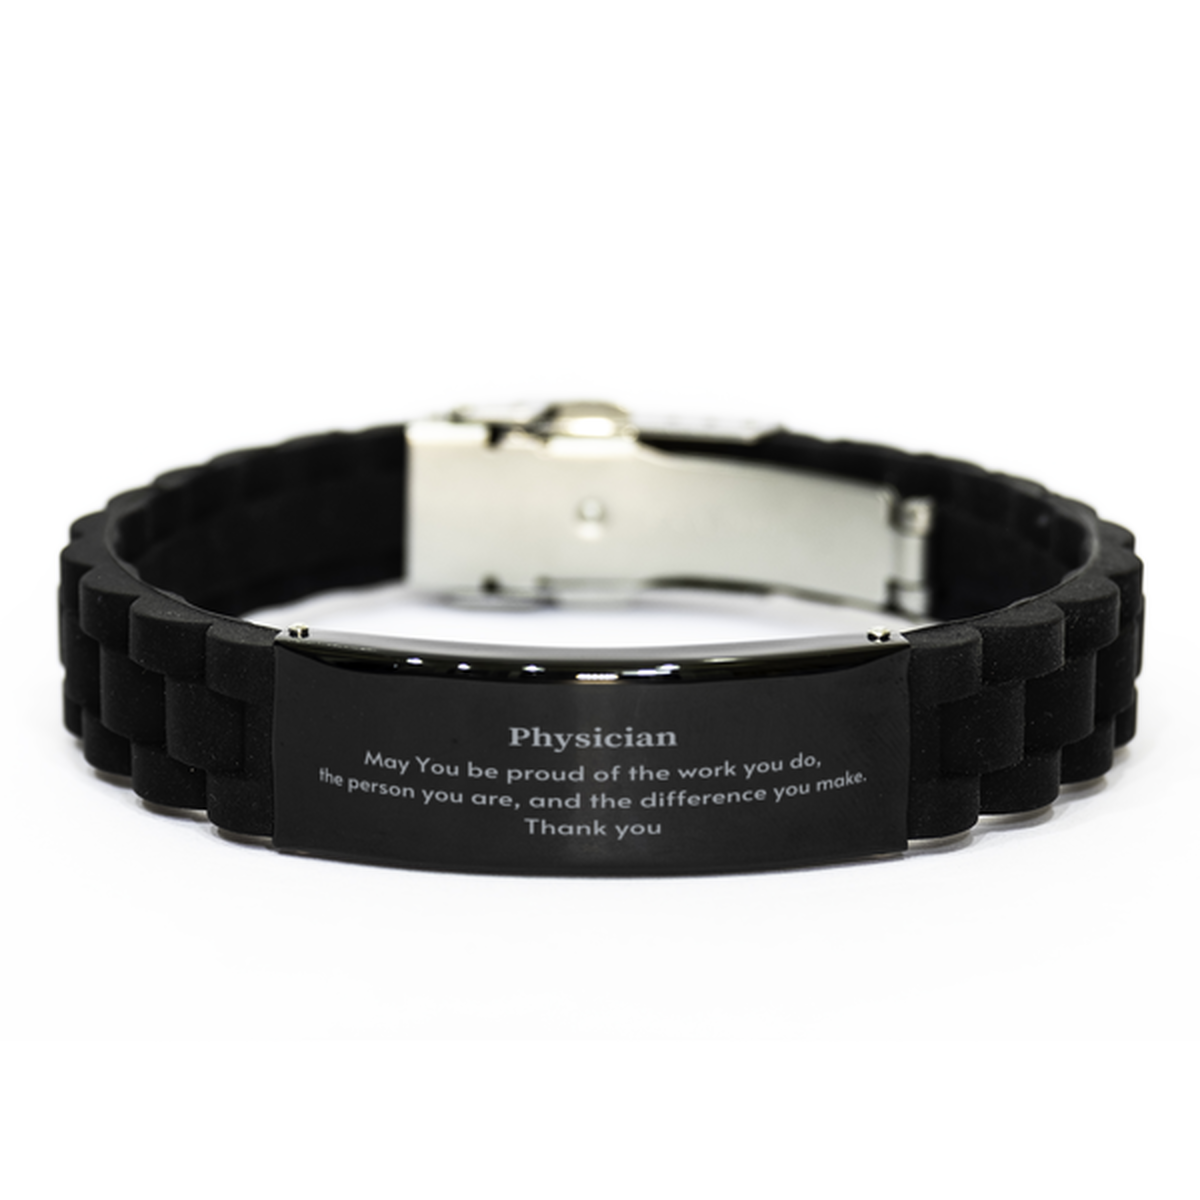 Heartwarming Black Glidelock Clasp Bracelet Retirement Coworkers Gifts for Physician, Physician May You be proud of the work you do, the person you are Gifts for Boss Men Women Friends